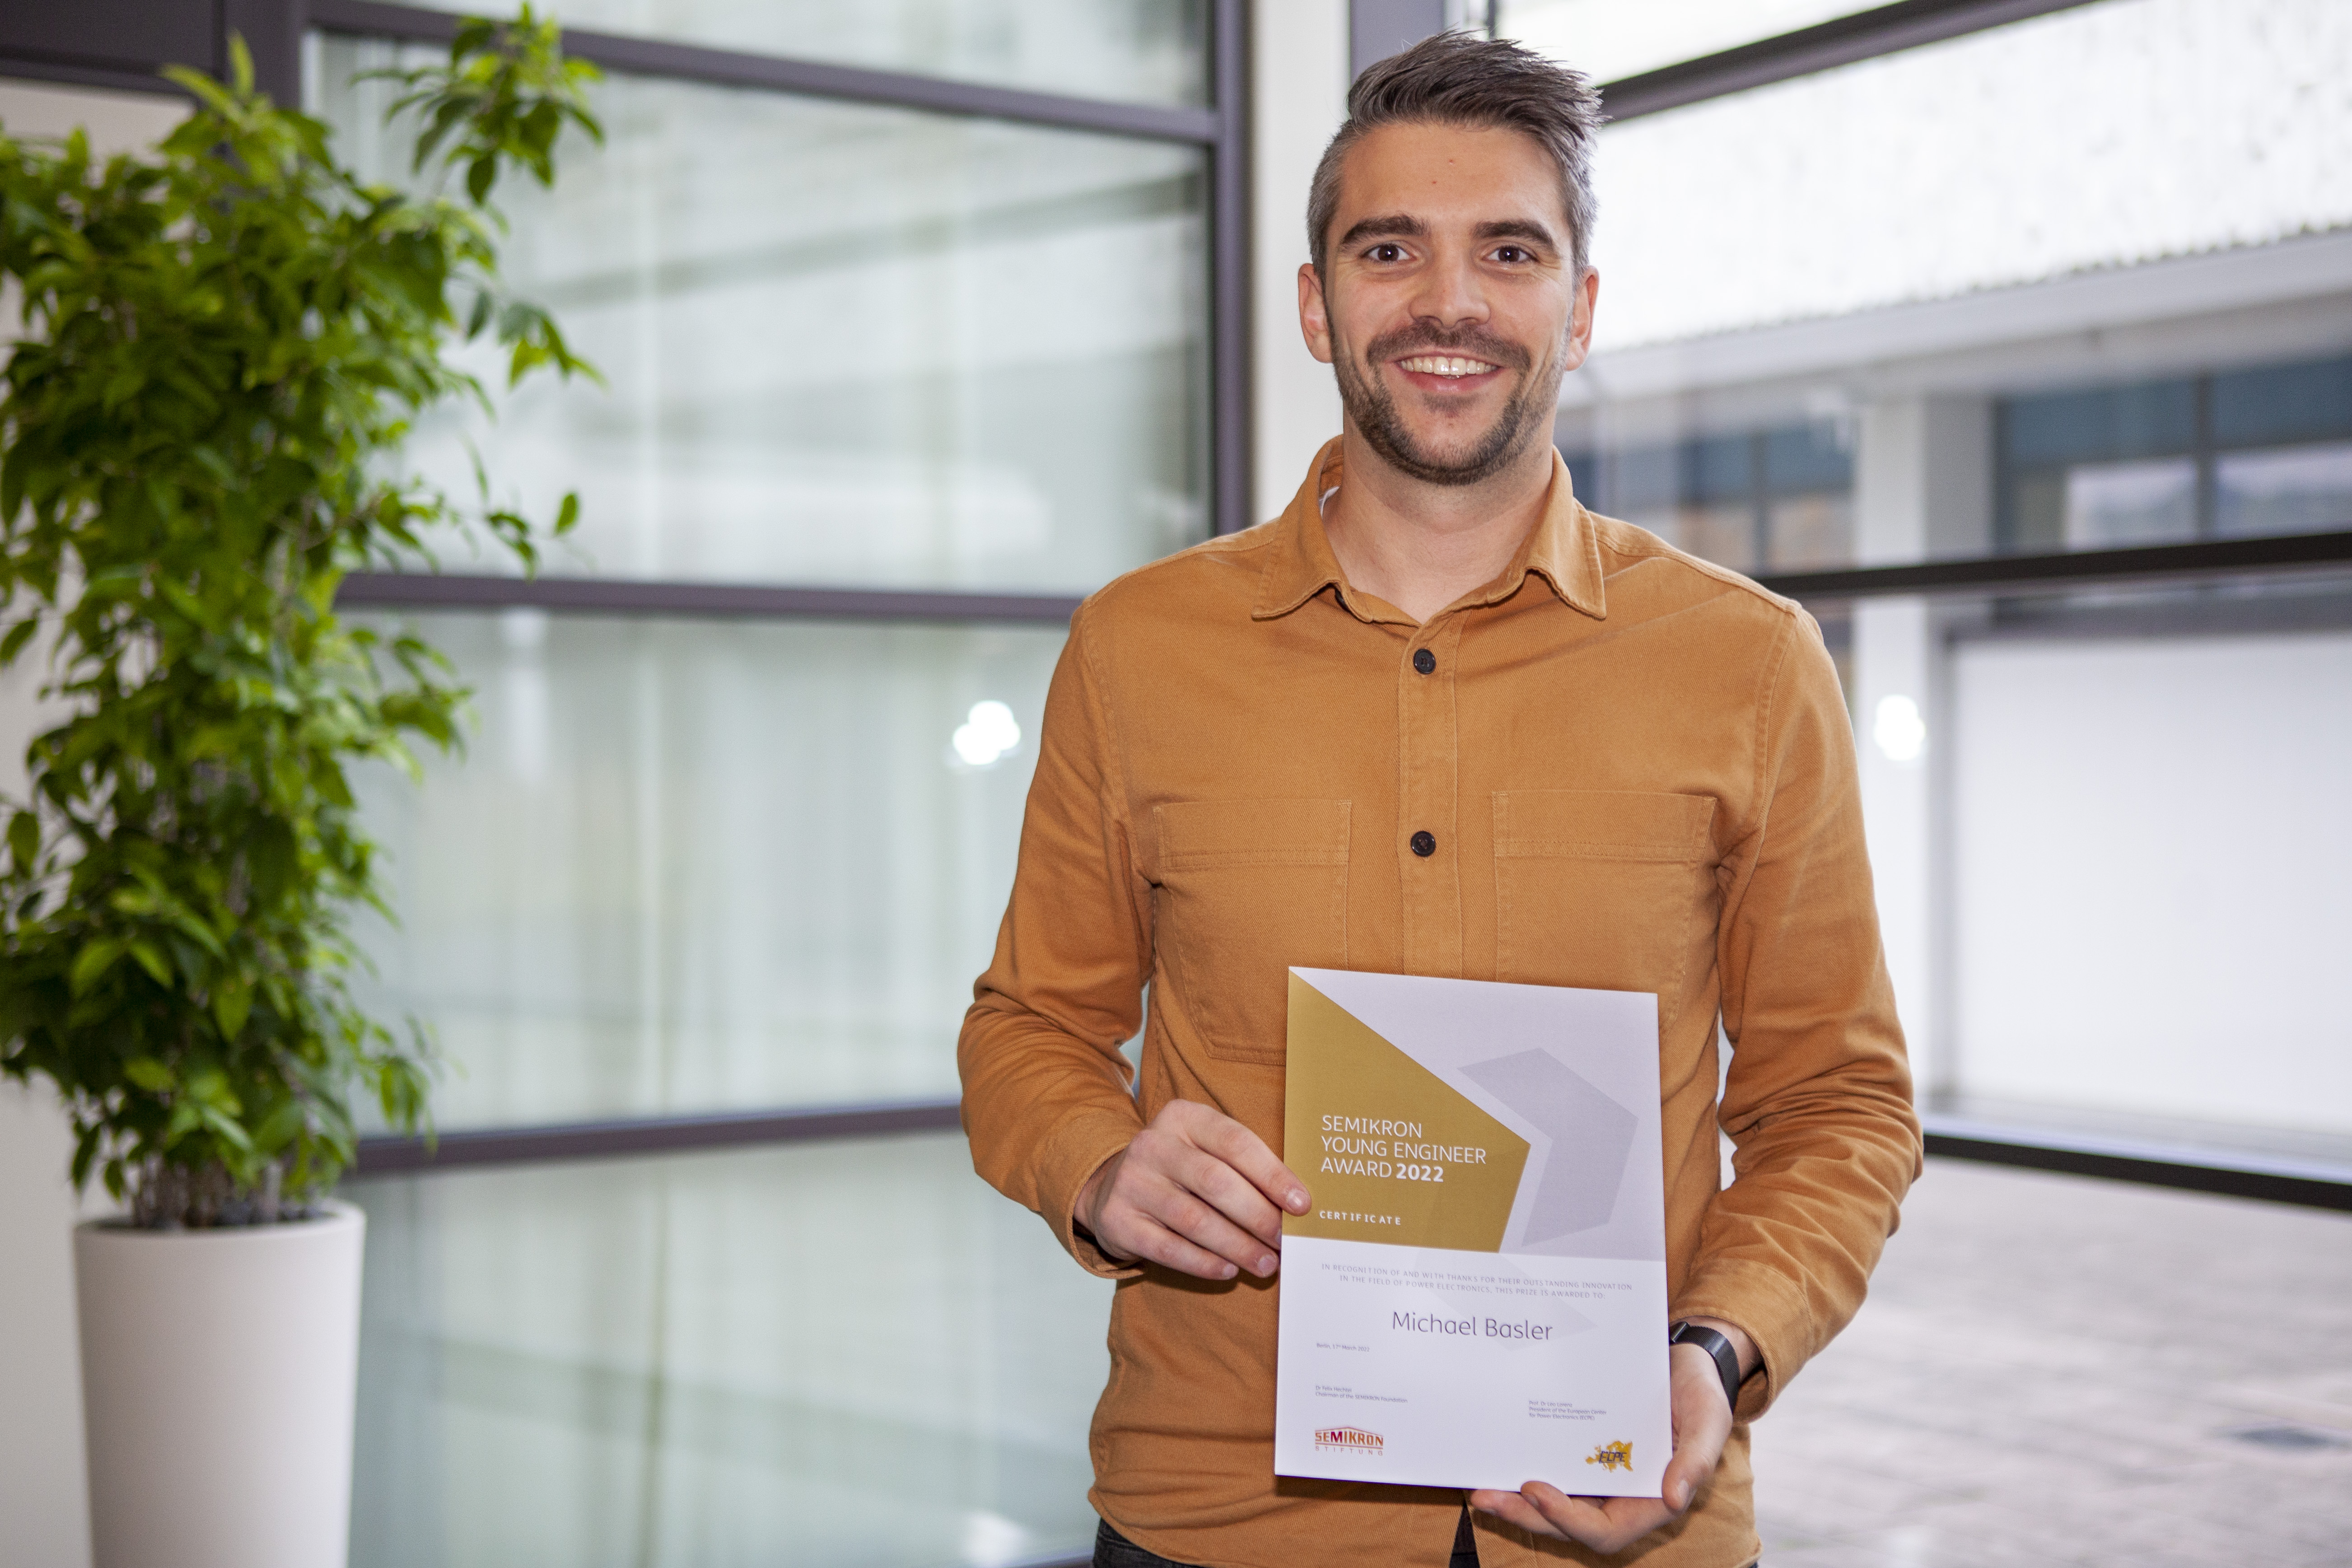 Michael Basler holds his certificate for the SEMIKRON Young Engineer Award 2022 in his hands.